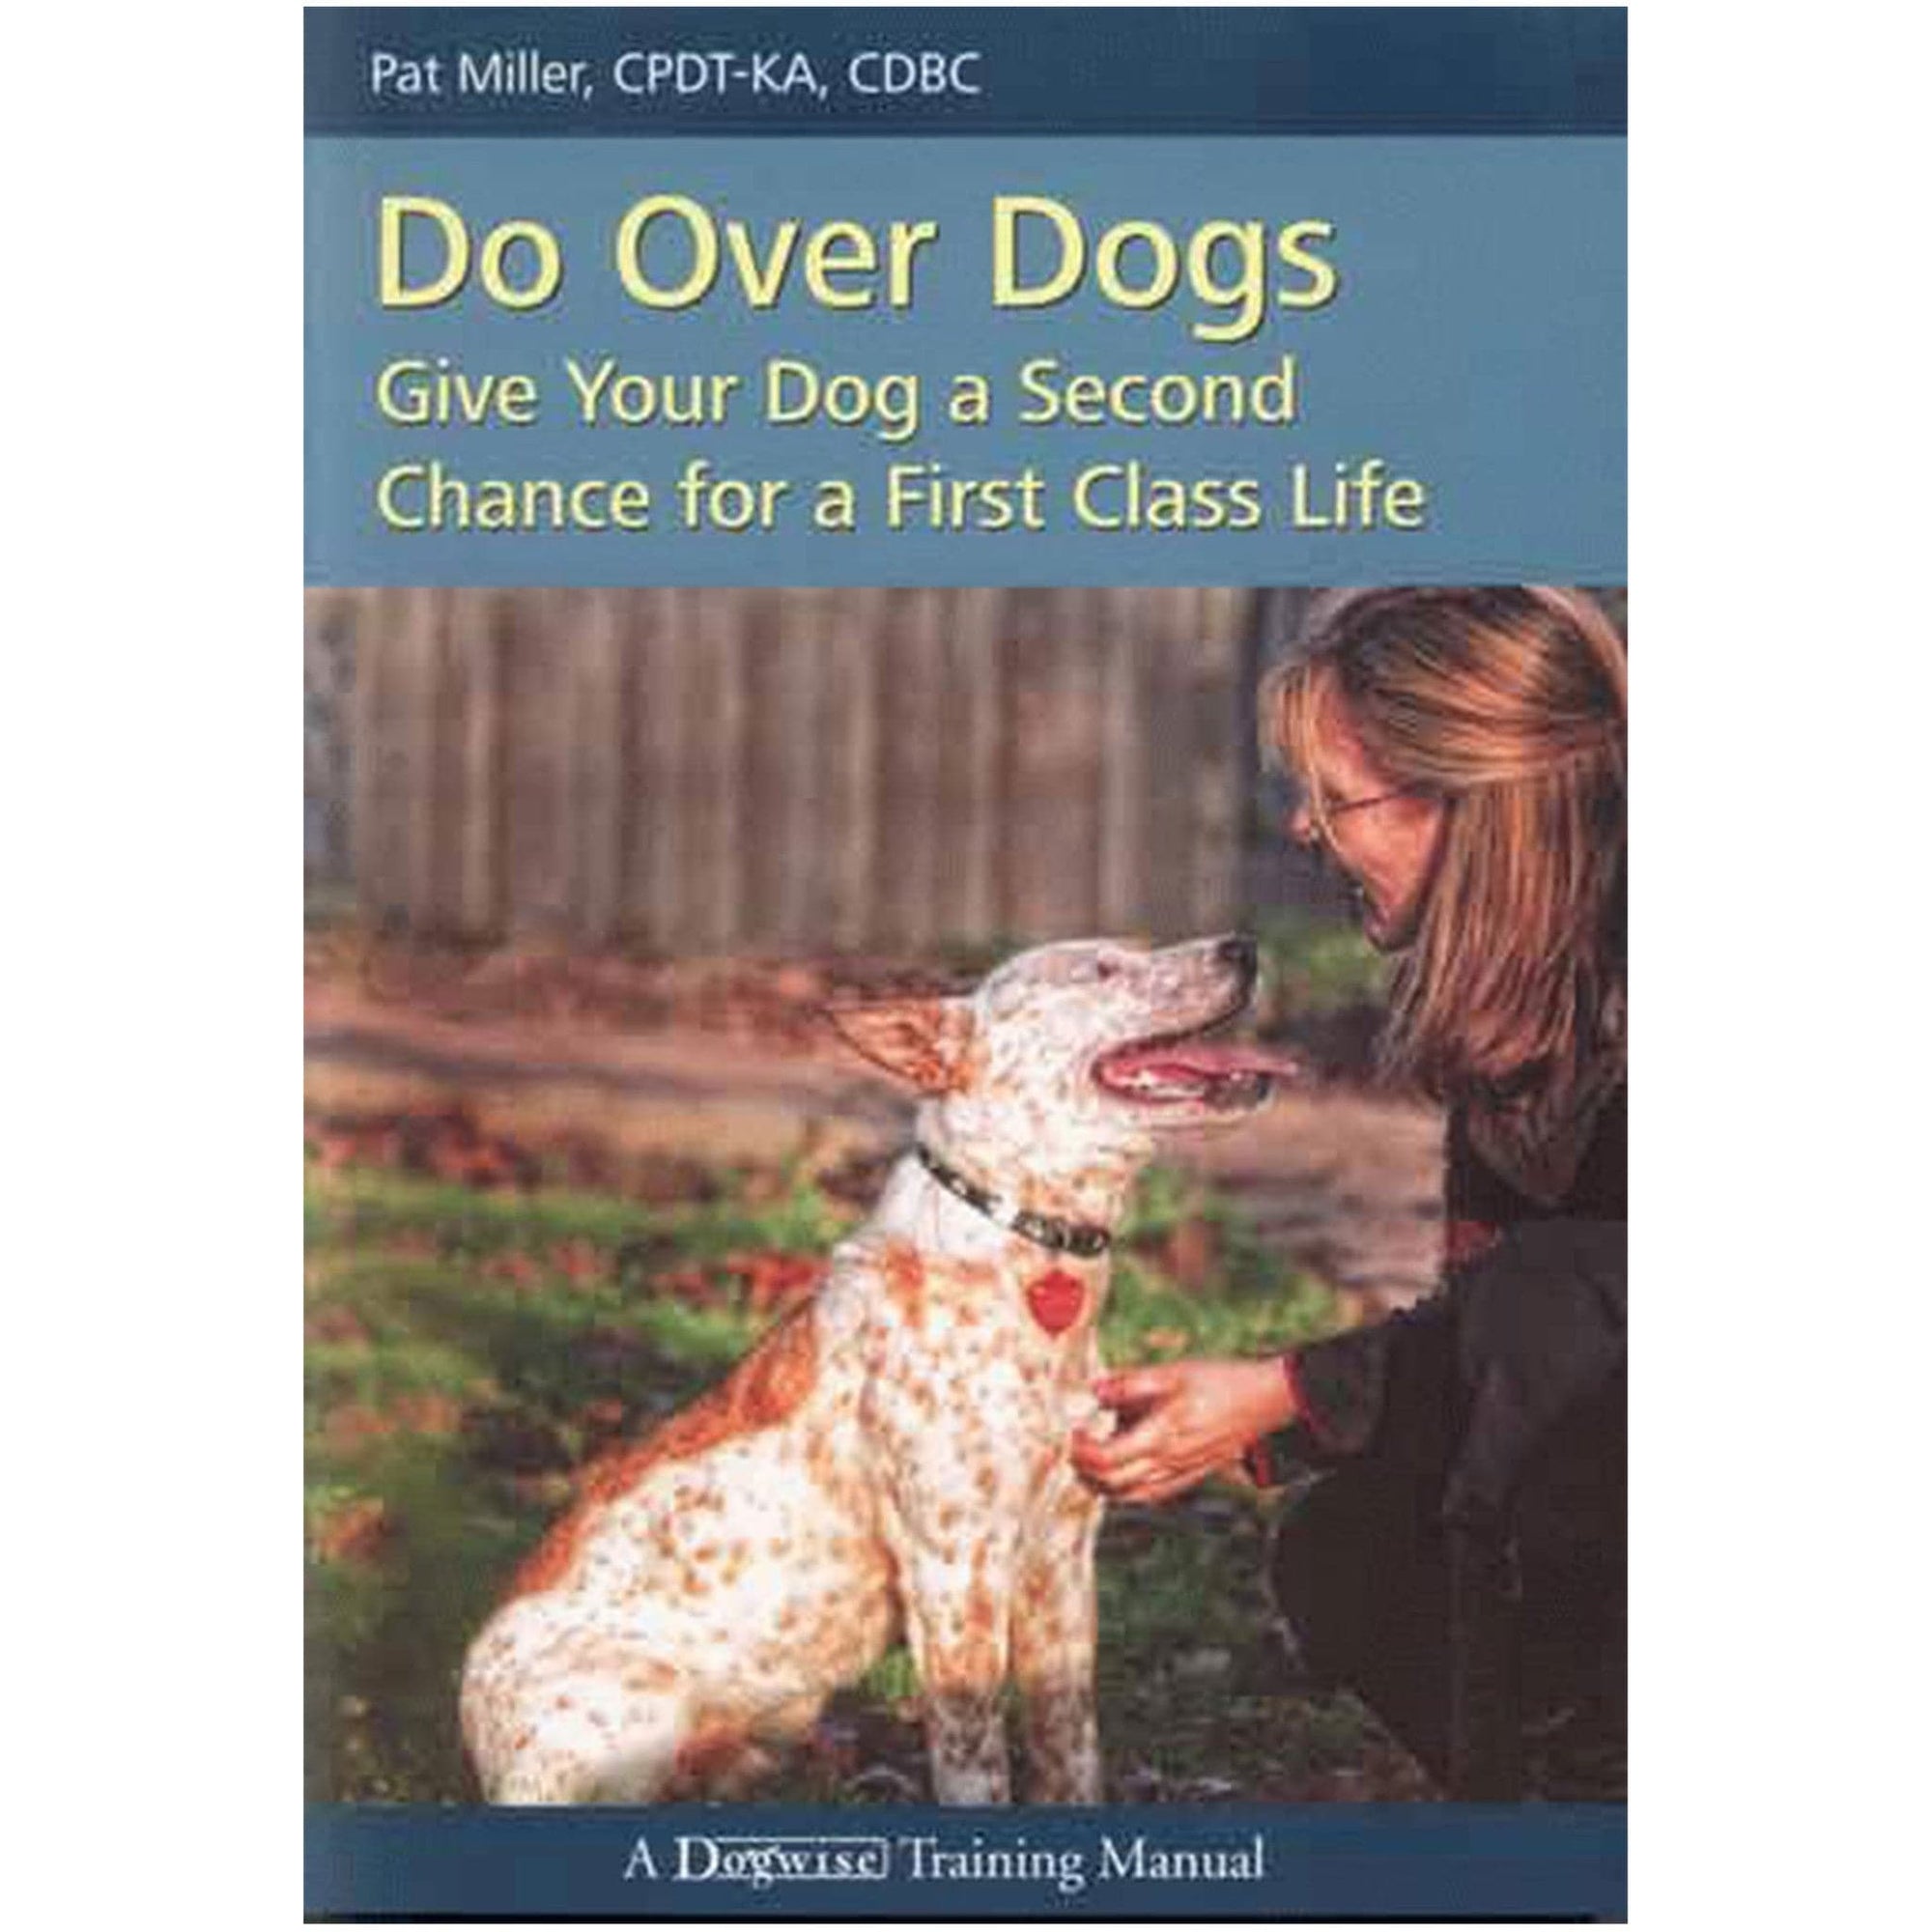 E-BOOK Do Over Dogs: Give Your Dog a Second Chance for a First Class Life by Pat Miller